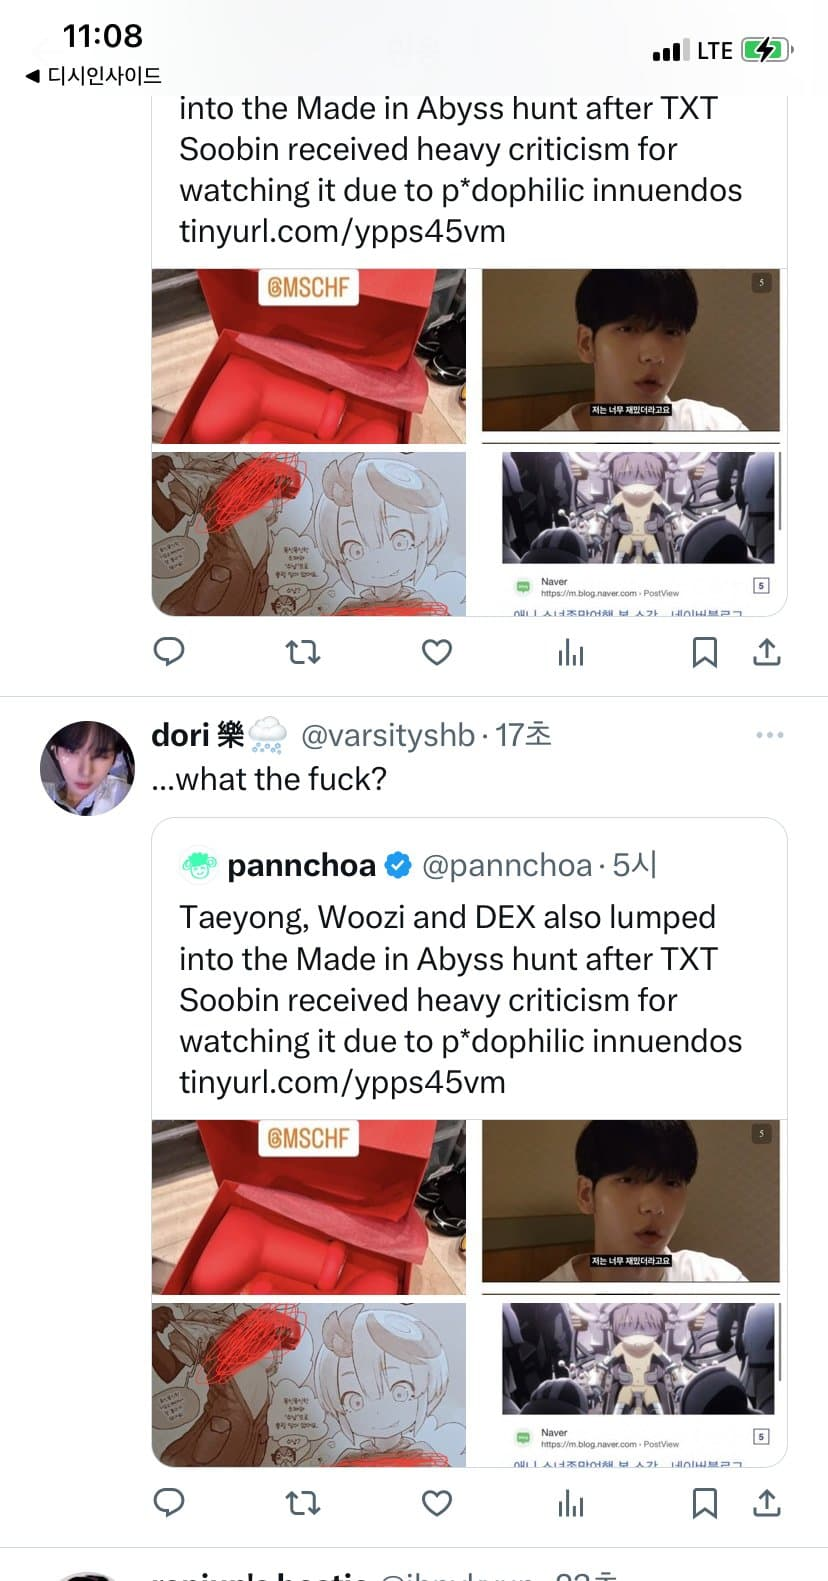 Made in Abyss Controversy Explained: Why TXT's Soobin Is Being